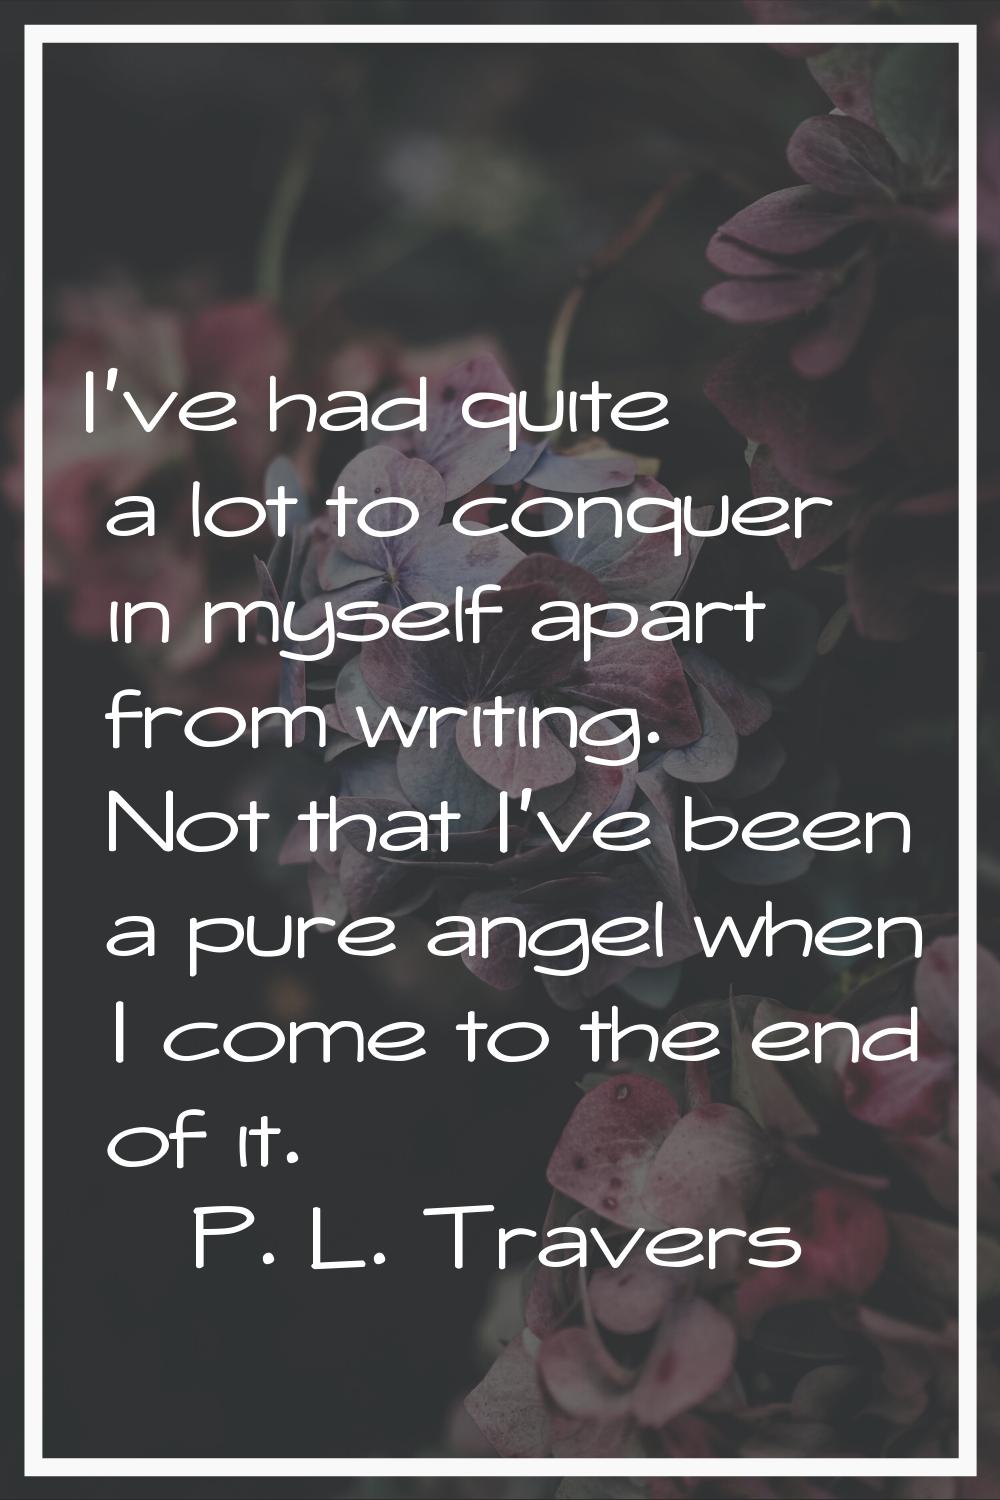 I've had quite a lot to conquer in myself apart from writing. Not that I've been a pure angel when 